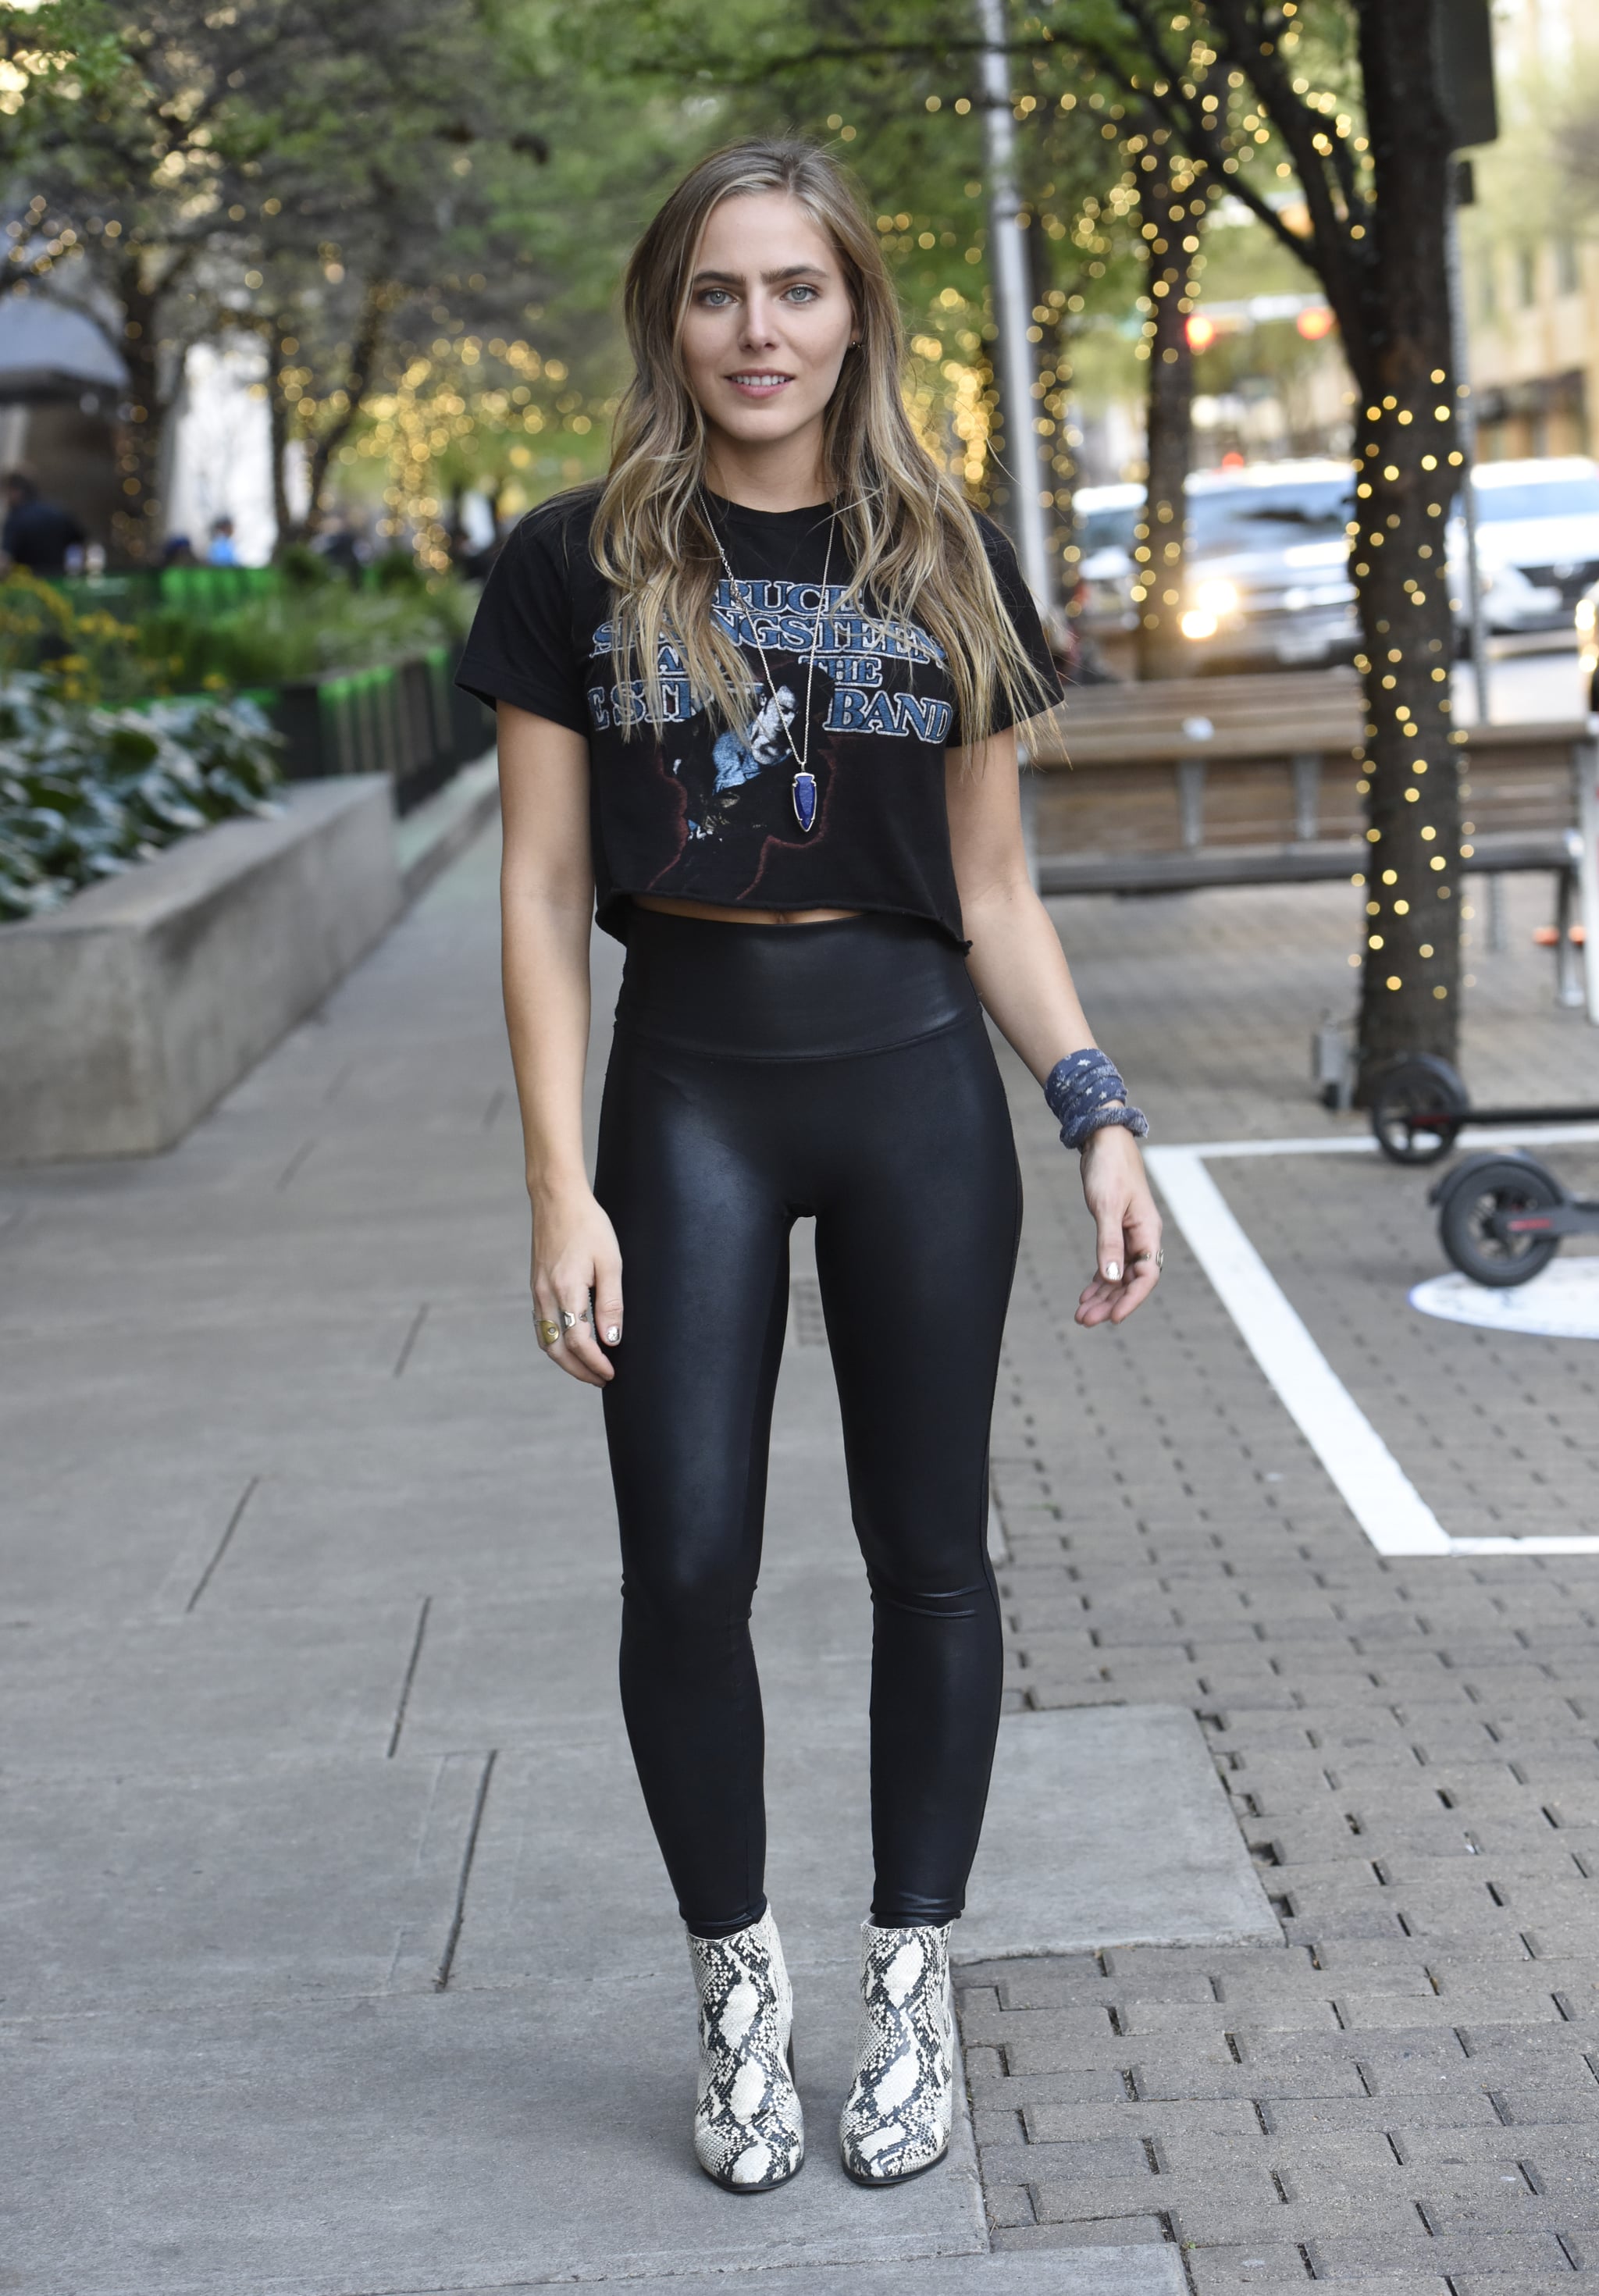 Add a Rock Chick Tee and Snakeskin Boots, 27 Looks That Will Convince You  to Wear Leggings Outside the Gym